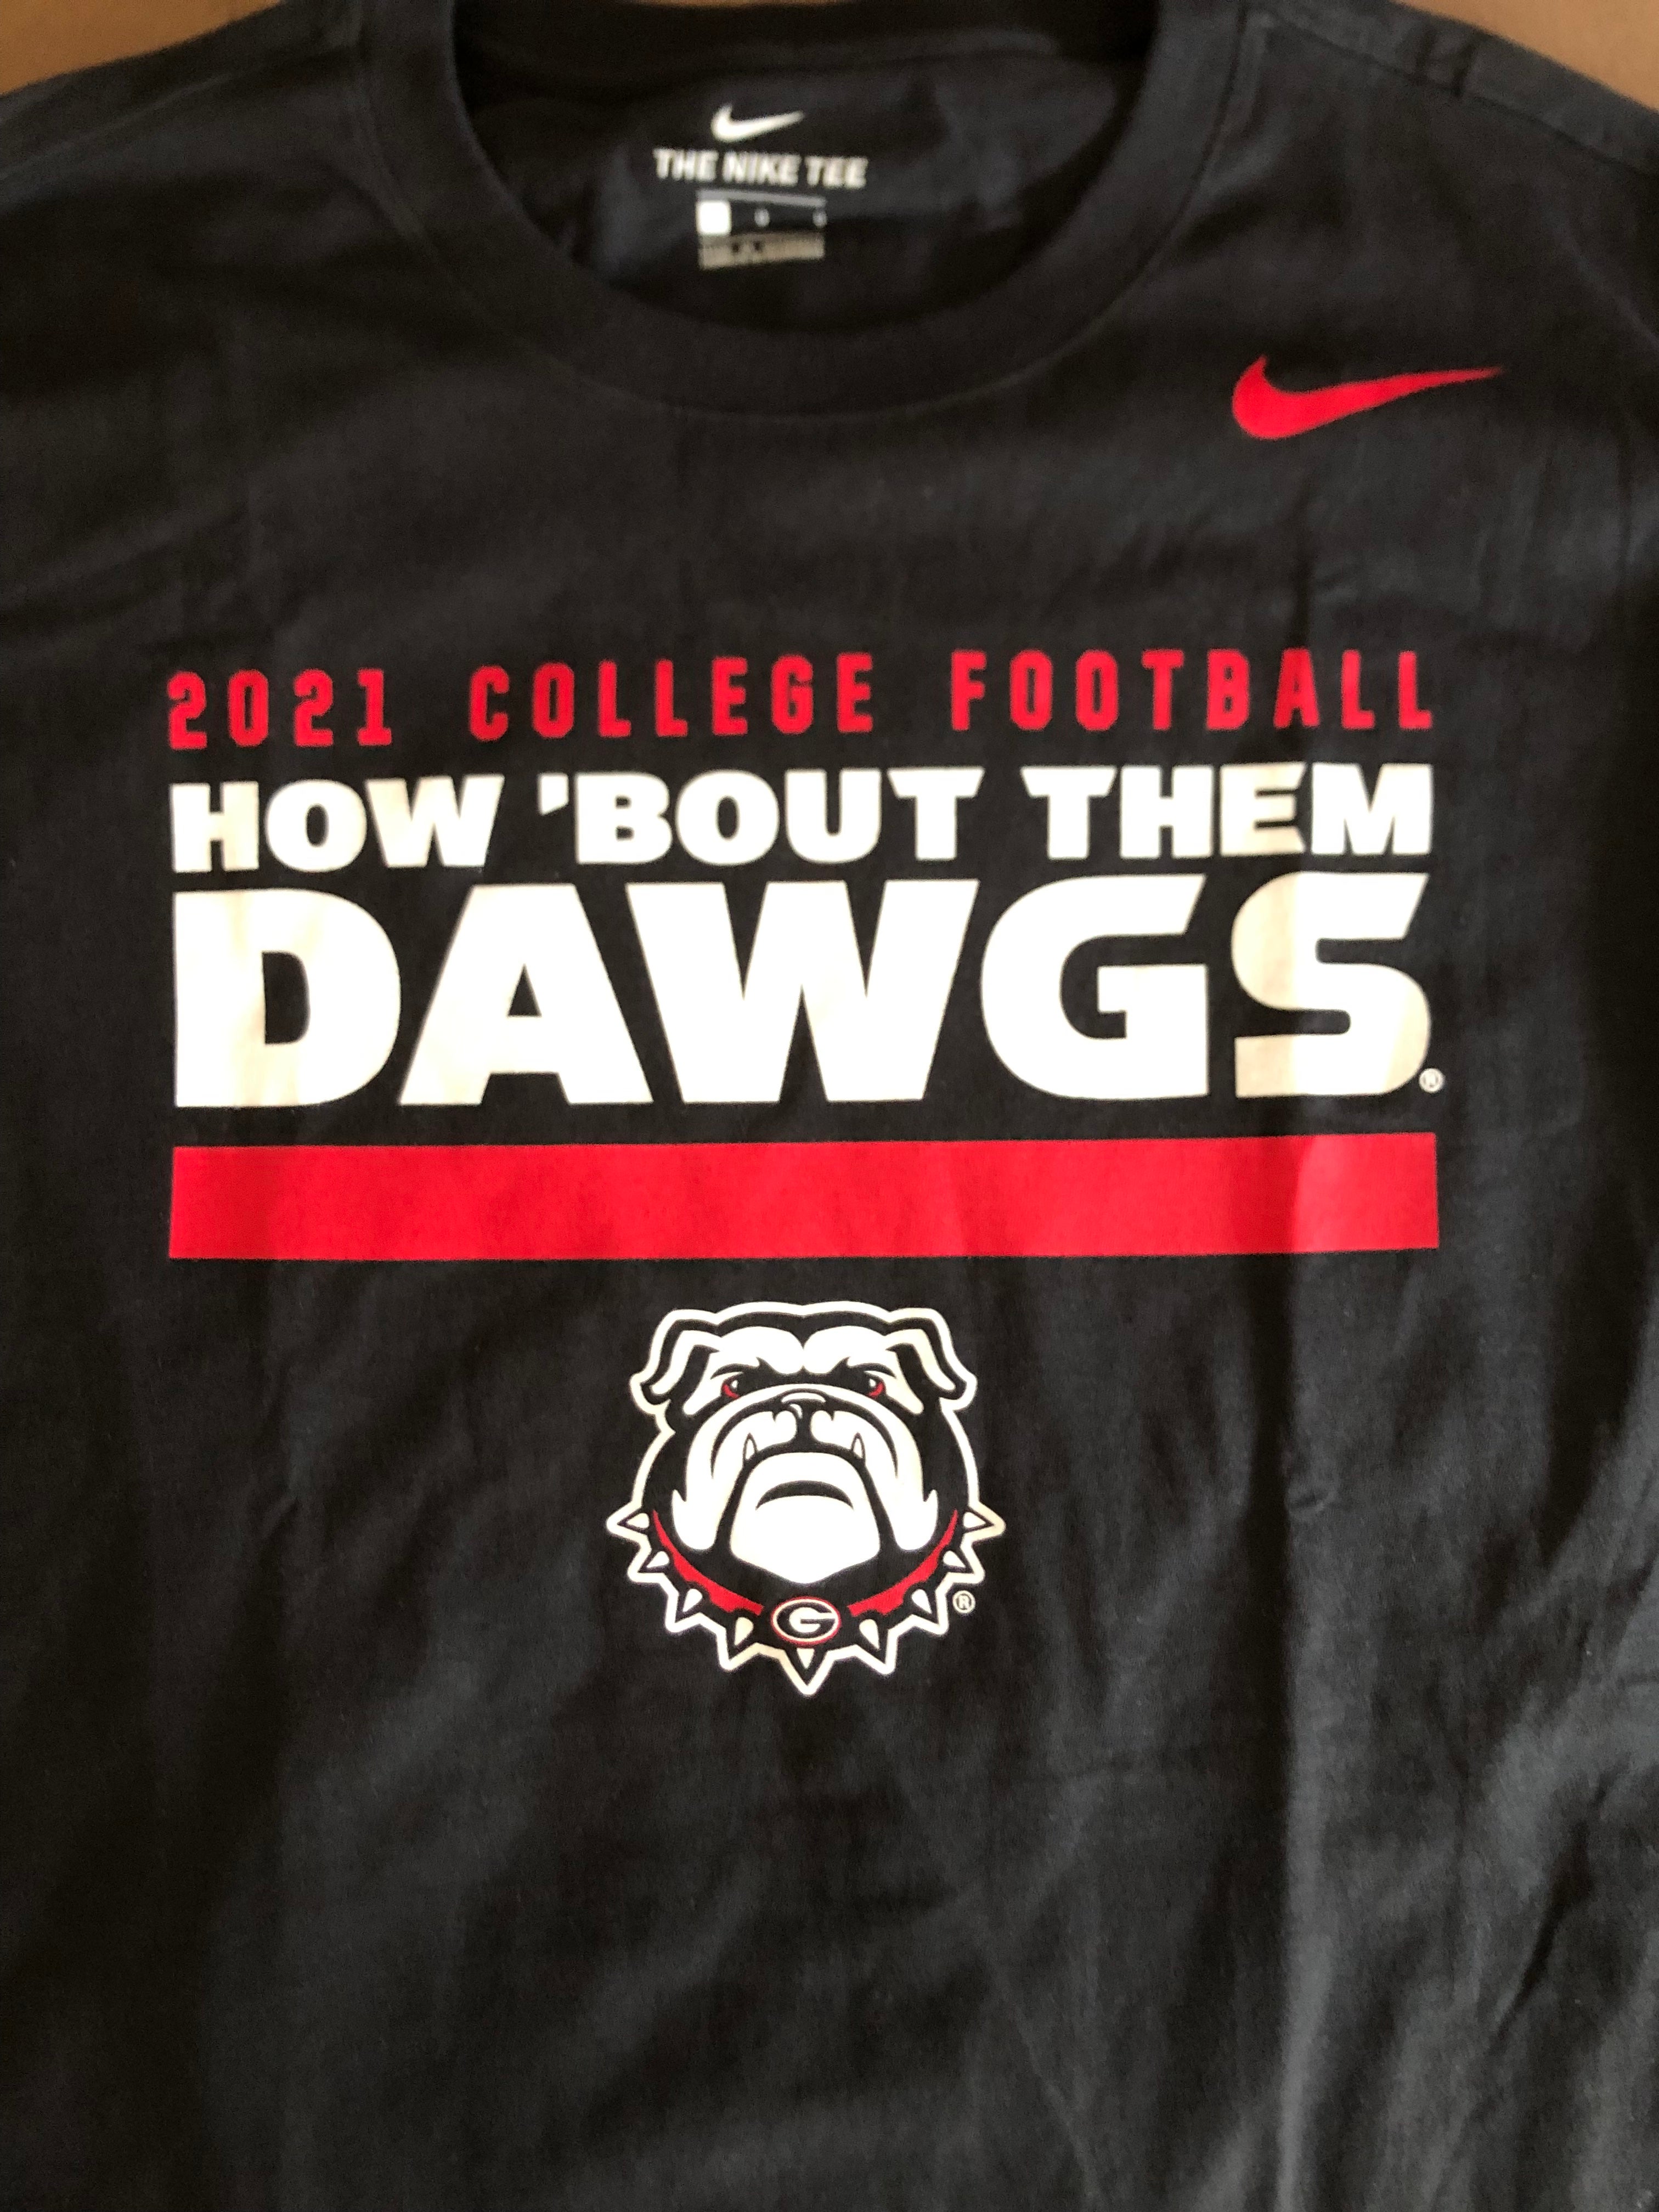 If you are a Braves and a Bulldog fan. Fanatics has the shirt for